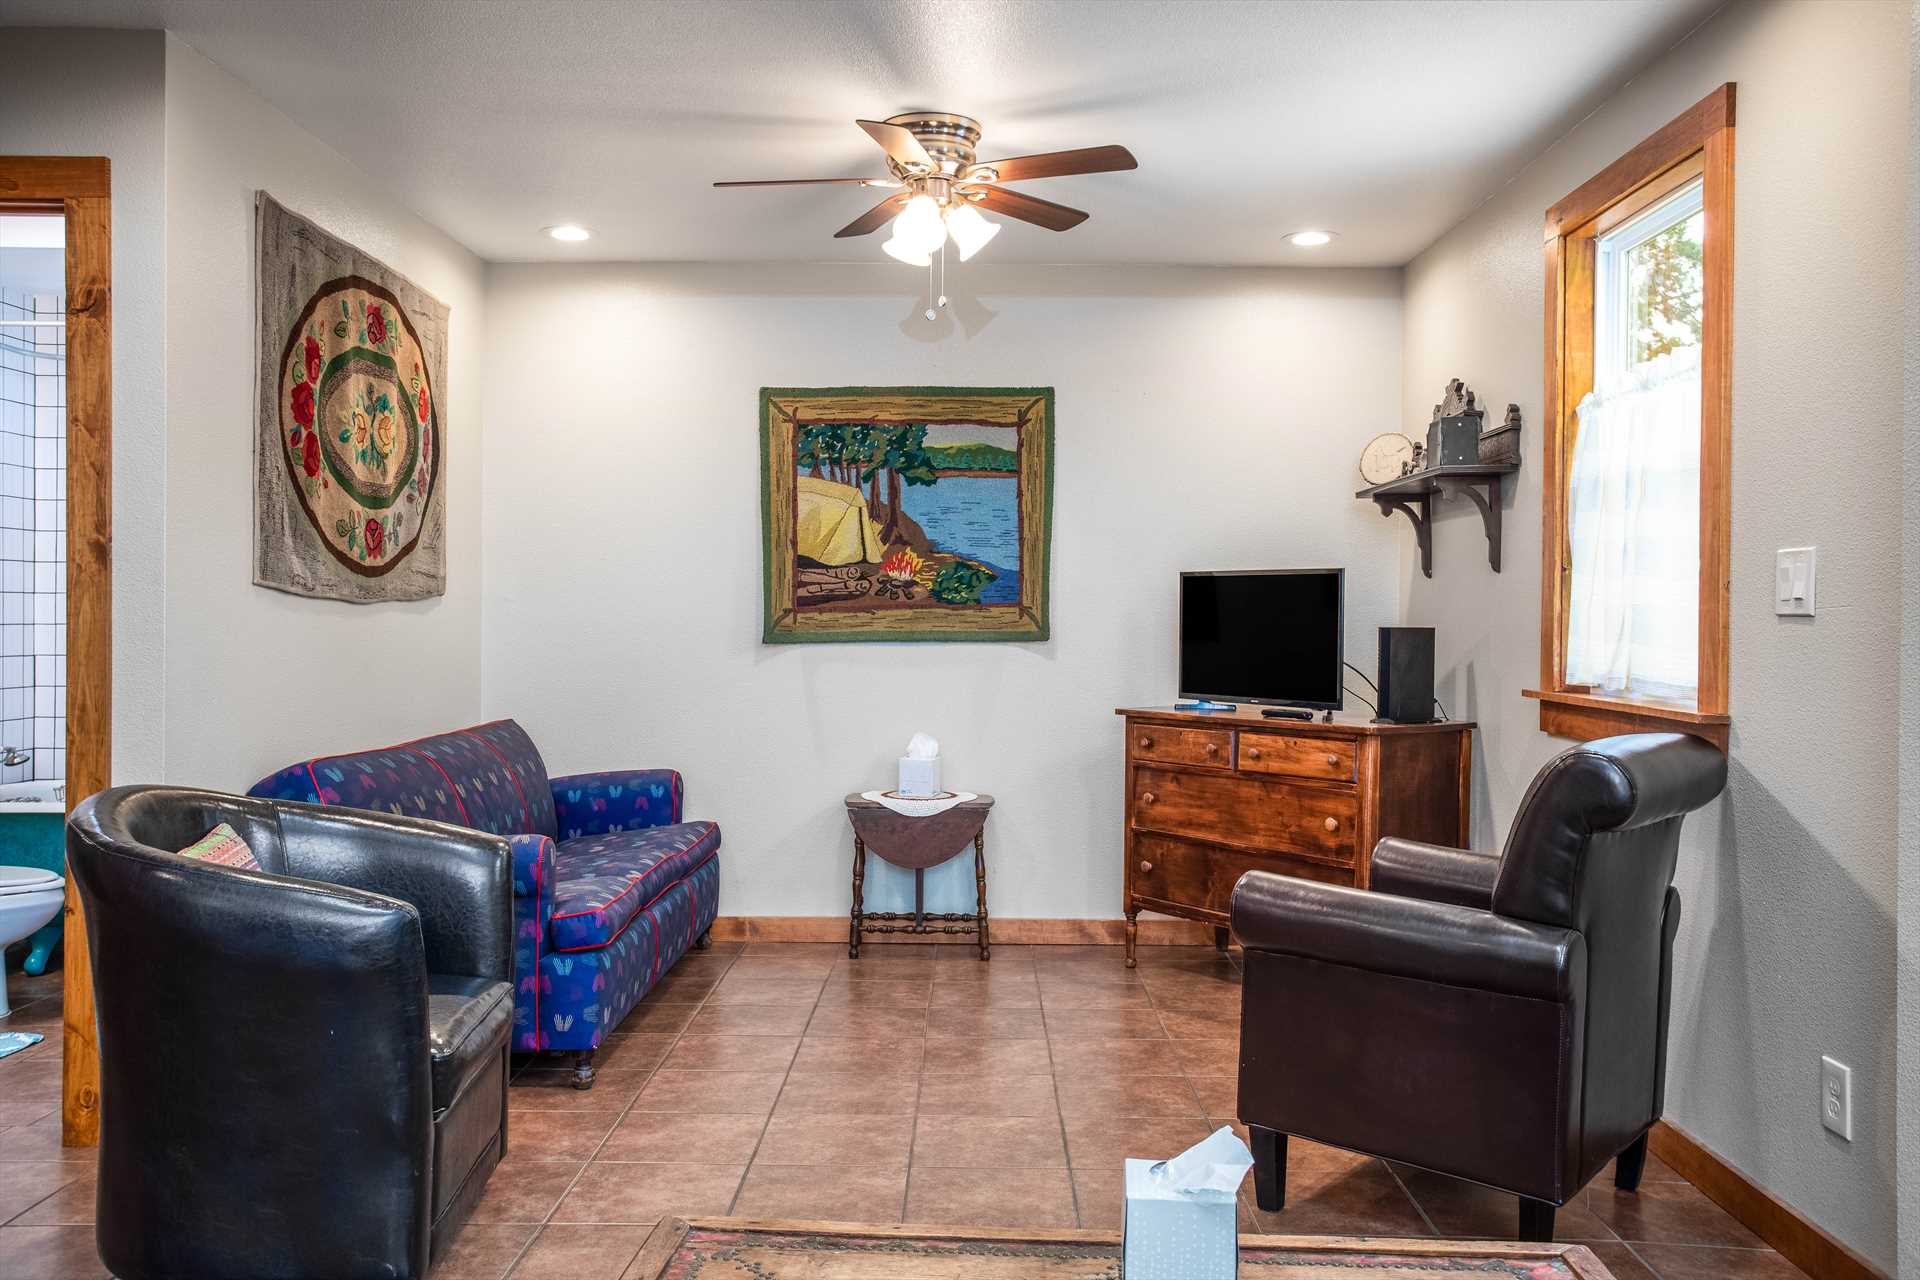                                                 Colorful and tasteful decor and furnishings make Abbott's Bandera River House an inviting and comfortable guest home.